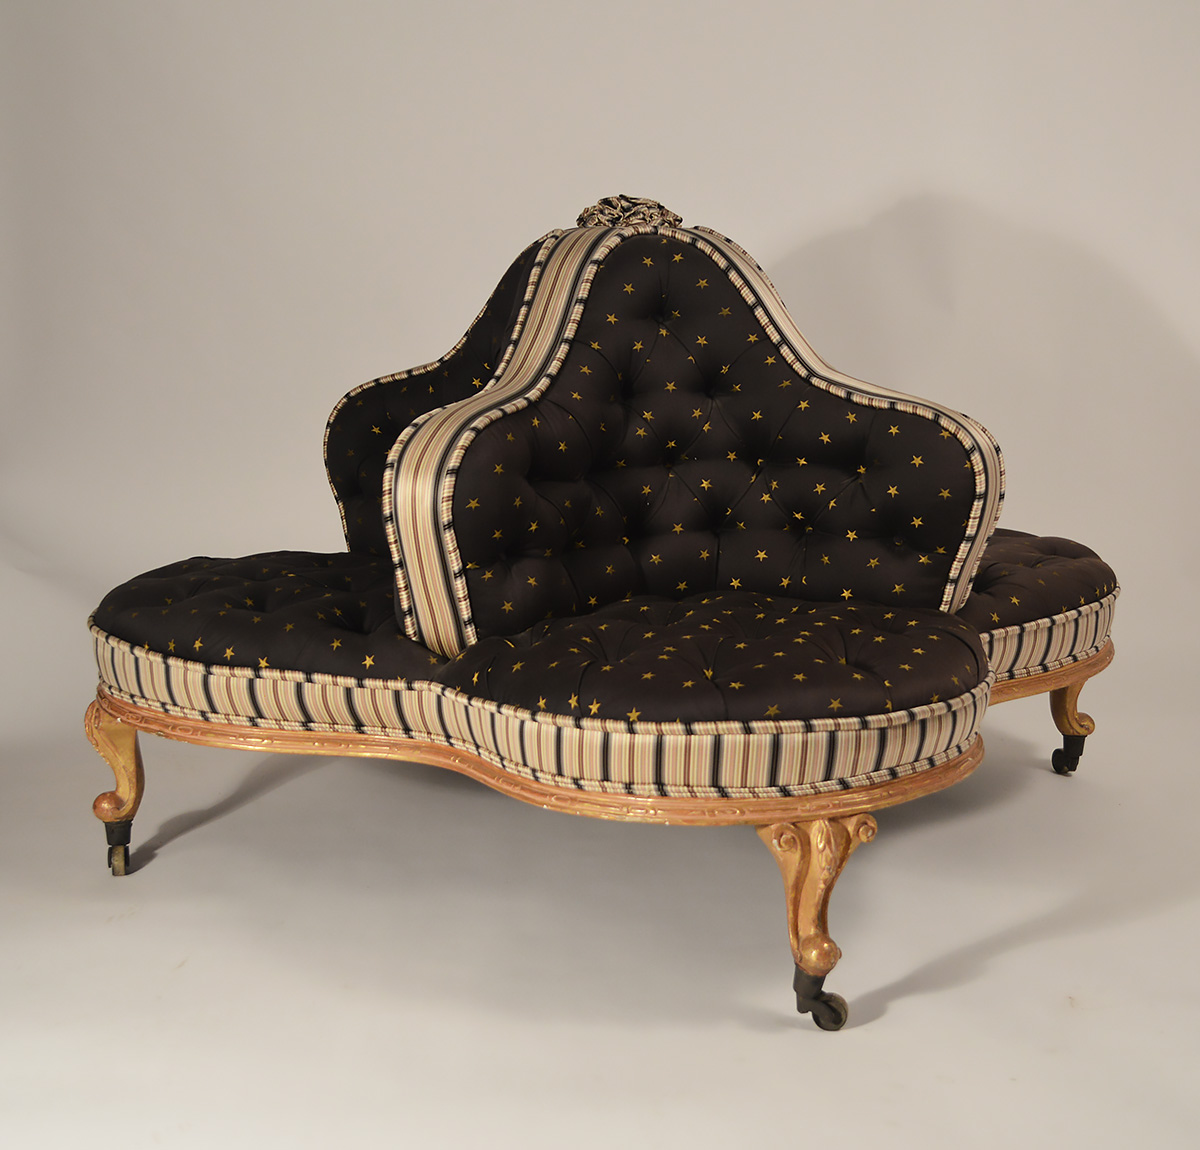 English, George IV period, giltwood and upholstered confidante